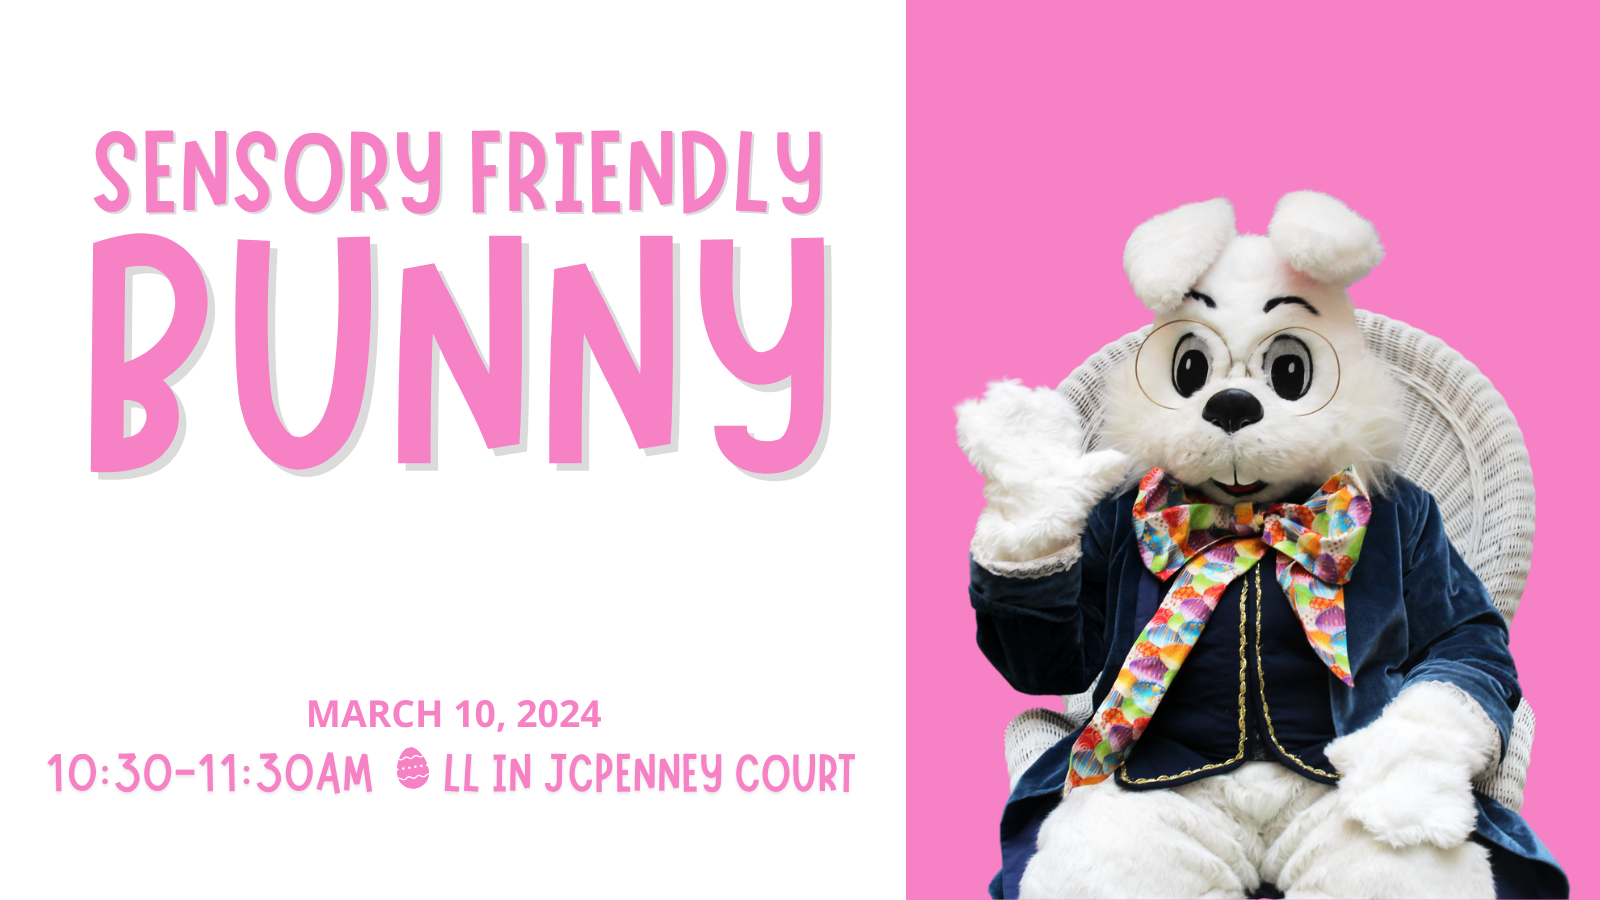 Sensory friendly bunny on March 10 from 10:30- 11:30 AM